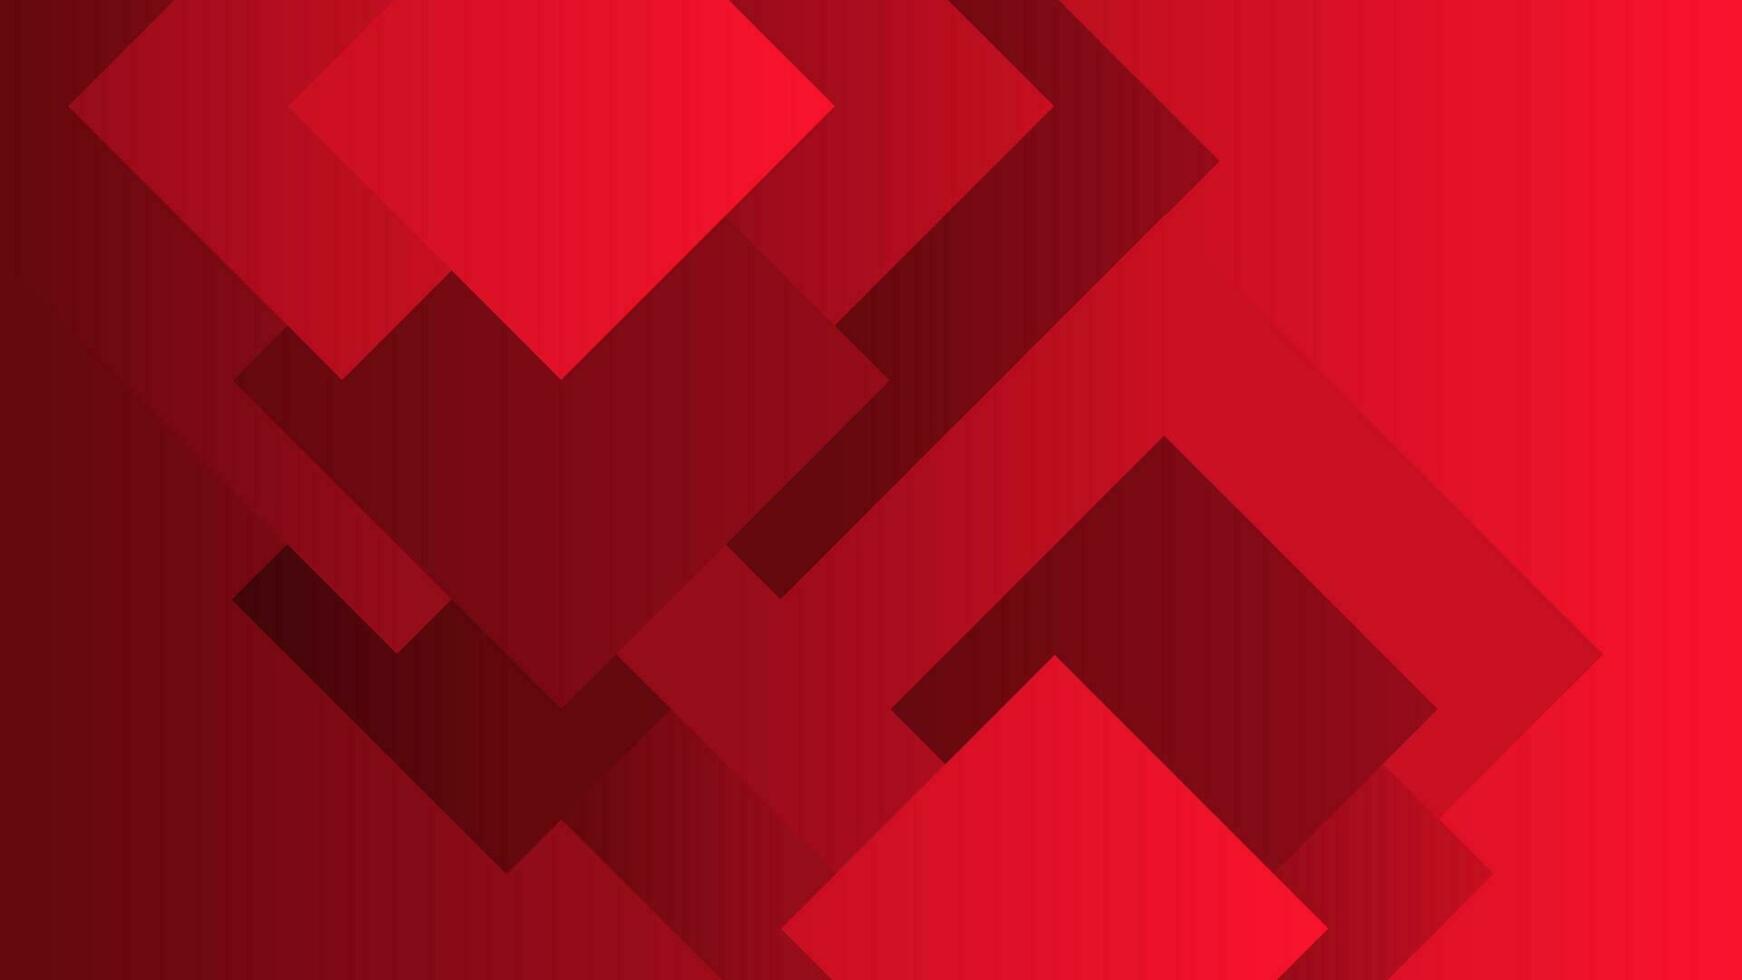 Abstract background vector illustration. Abstract red background vector illustration. Simple red background for wallpaper, display, landing page, banner, or layout. Design graphic for display